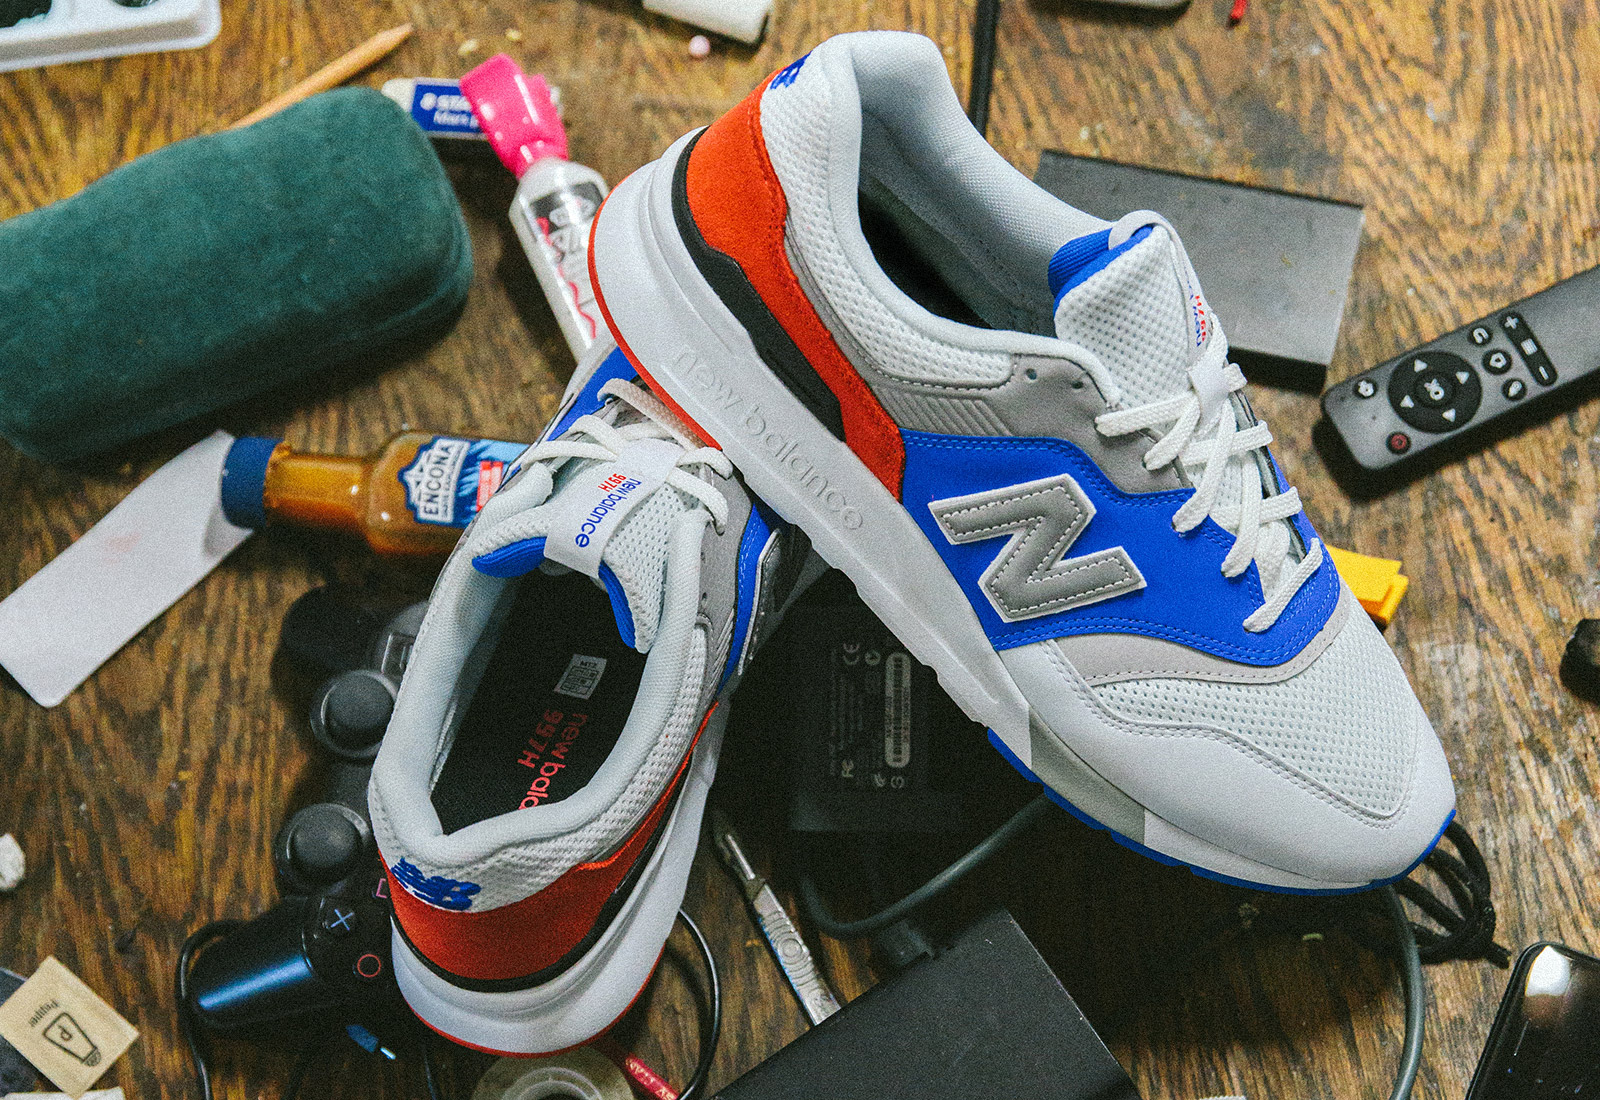 Everything You Need to Know about the New Balance 997 Sport